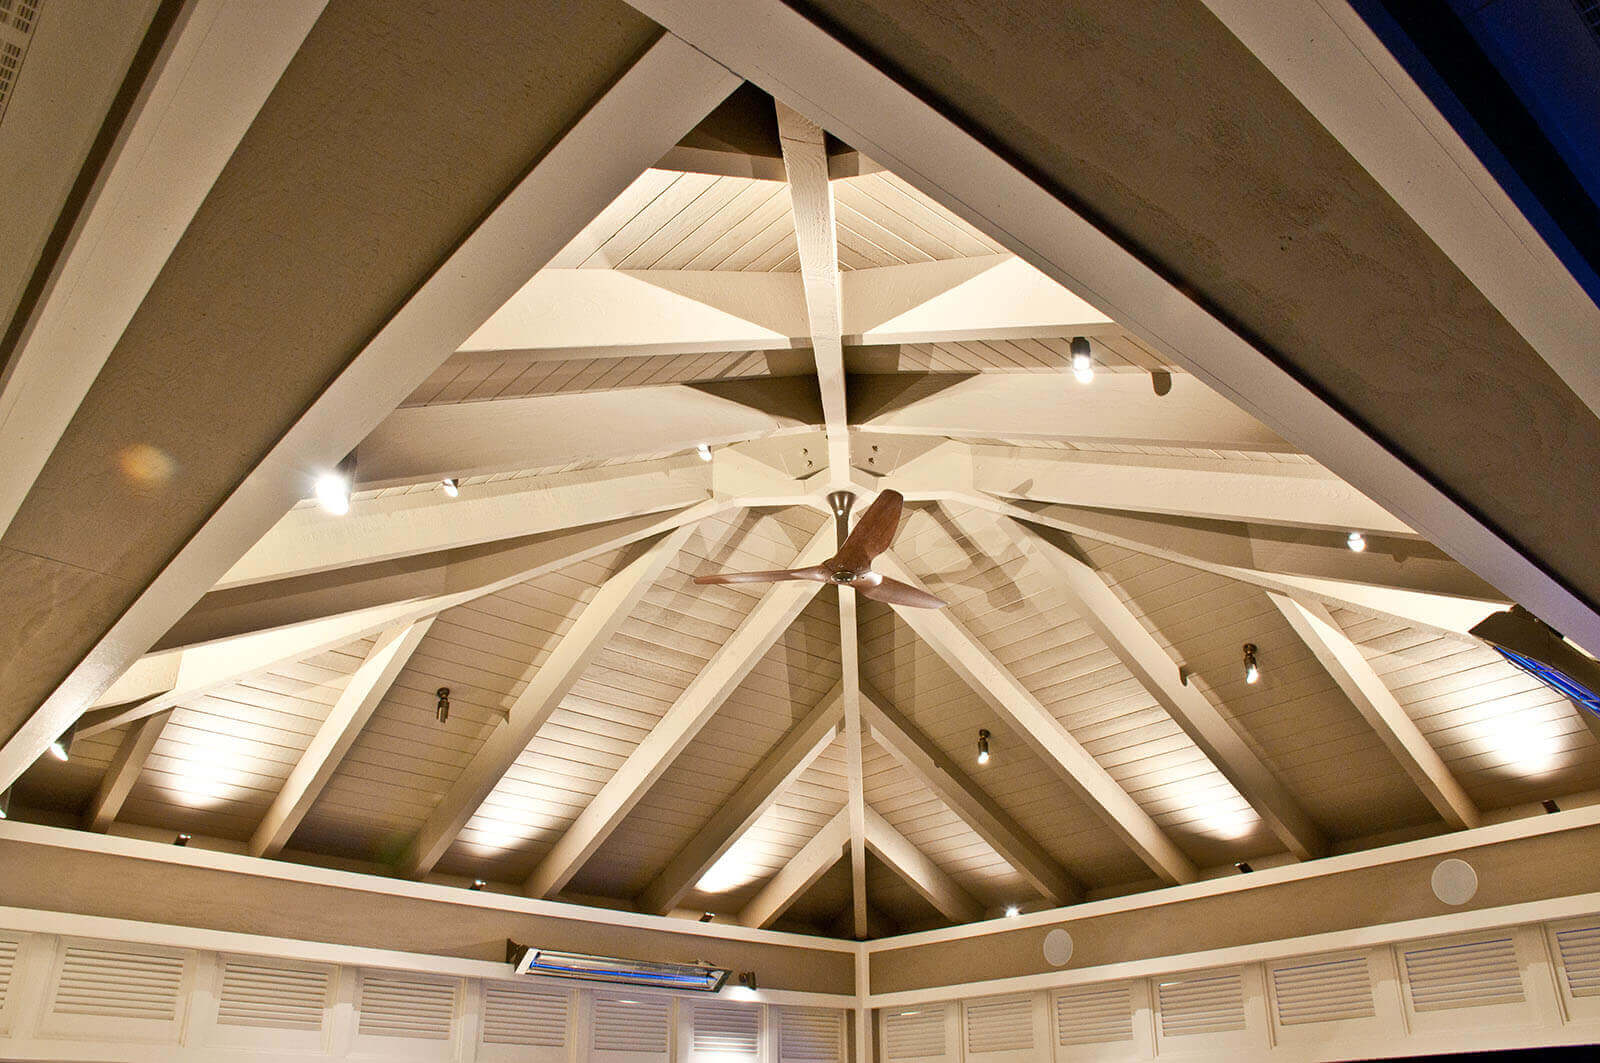 Interior shot of light accented pyramid wood roofing and fan with heating and lights below